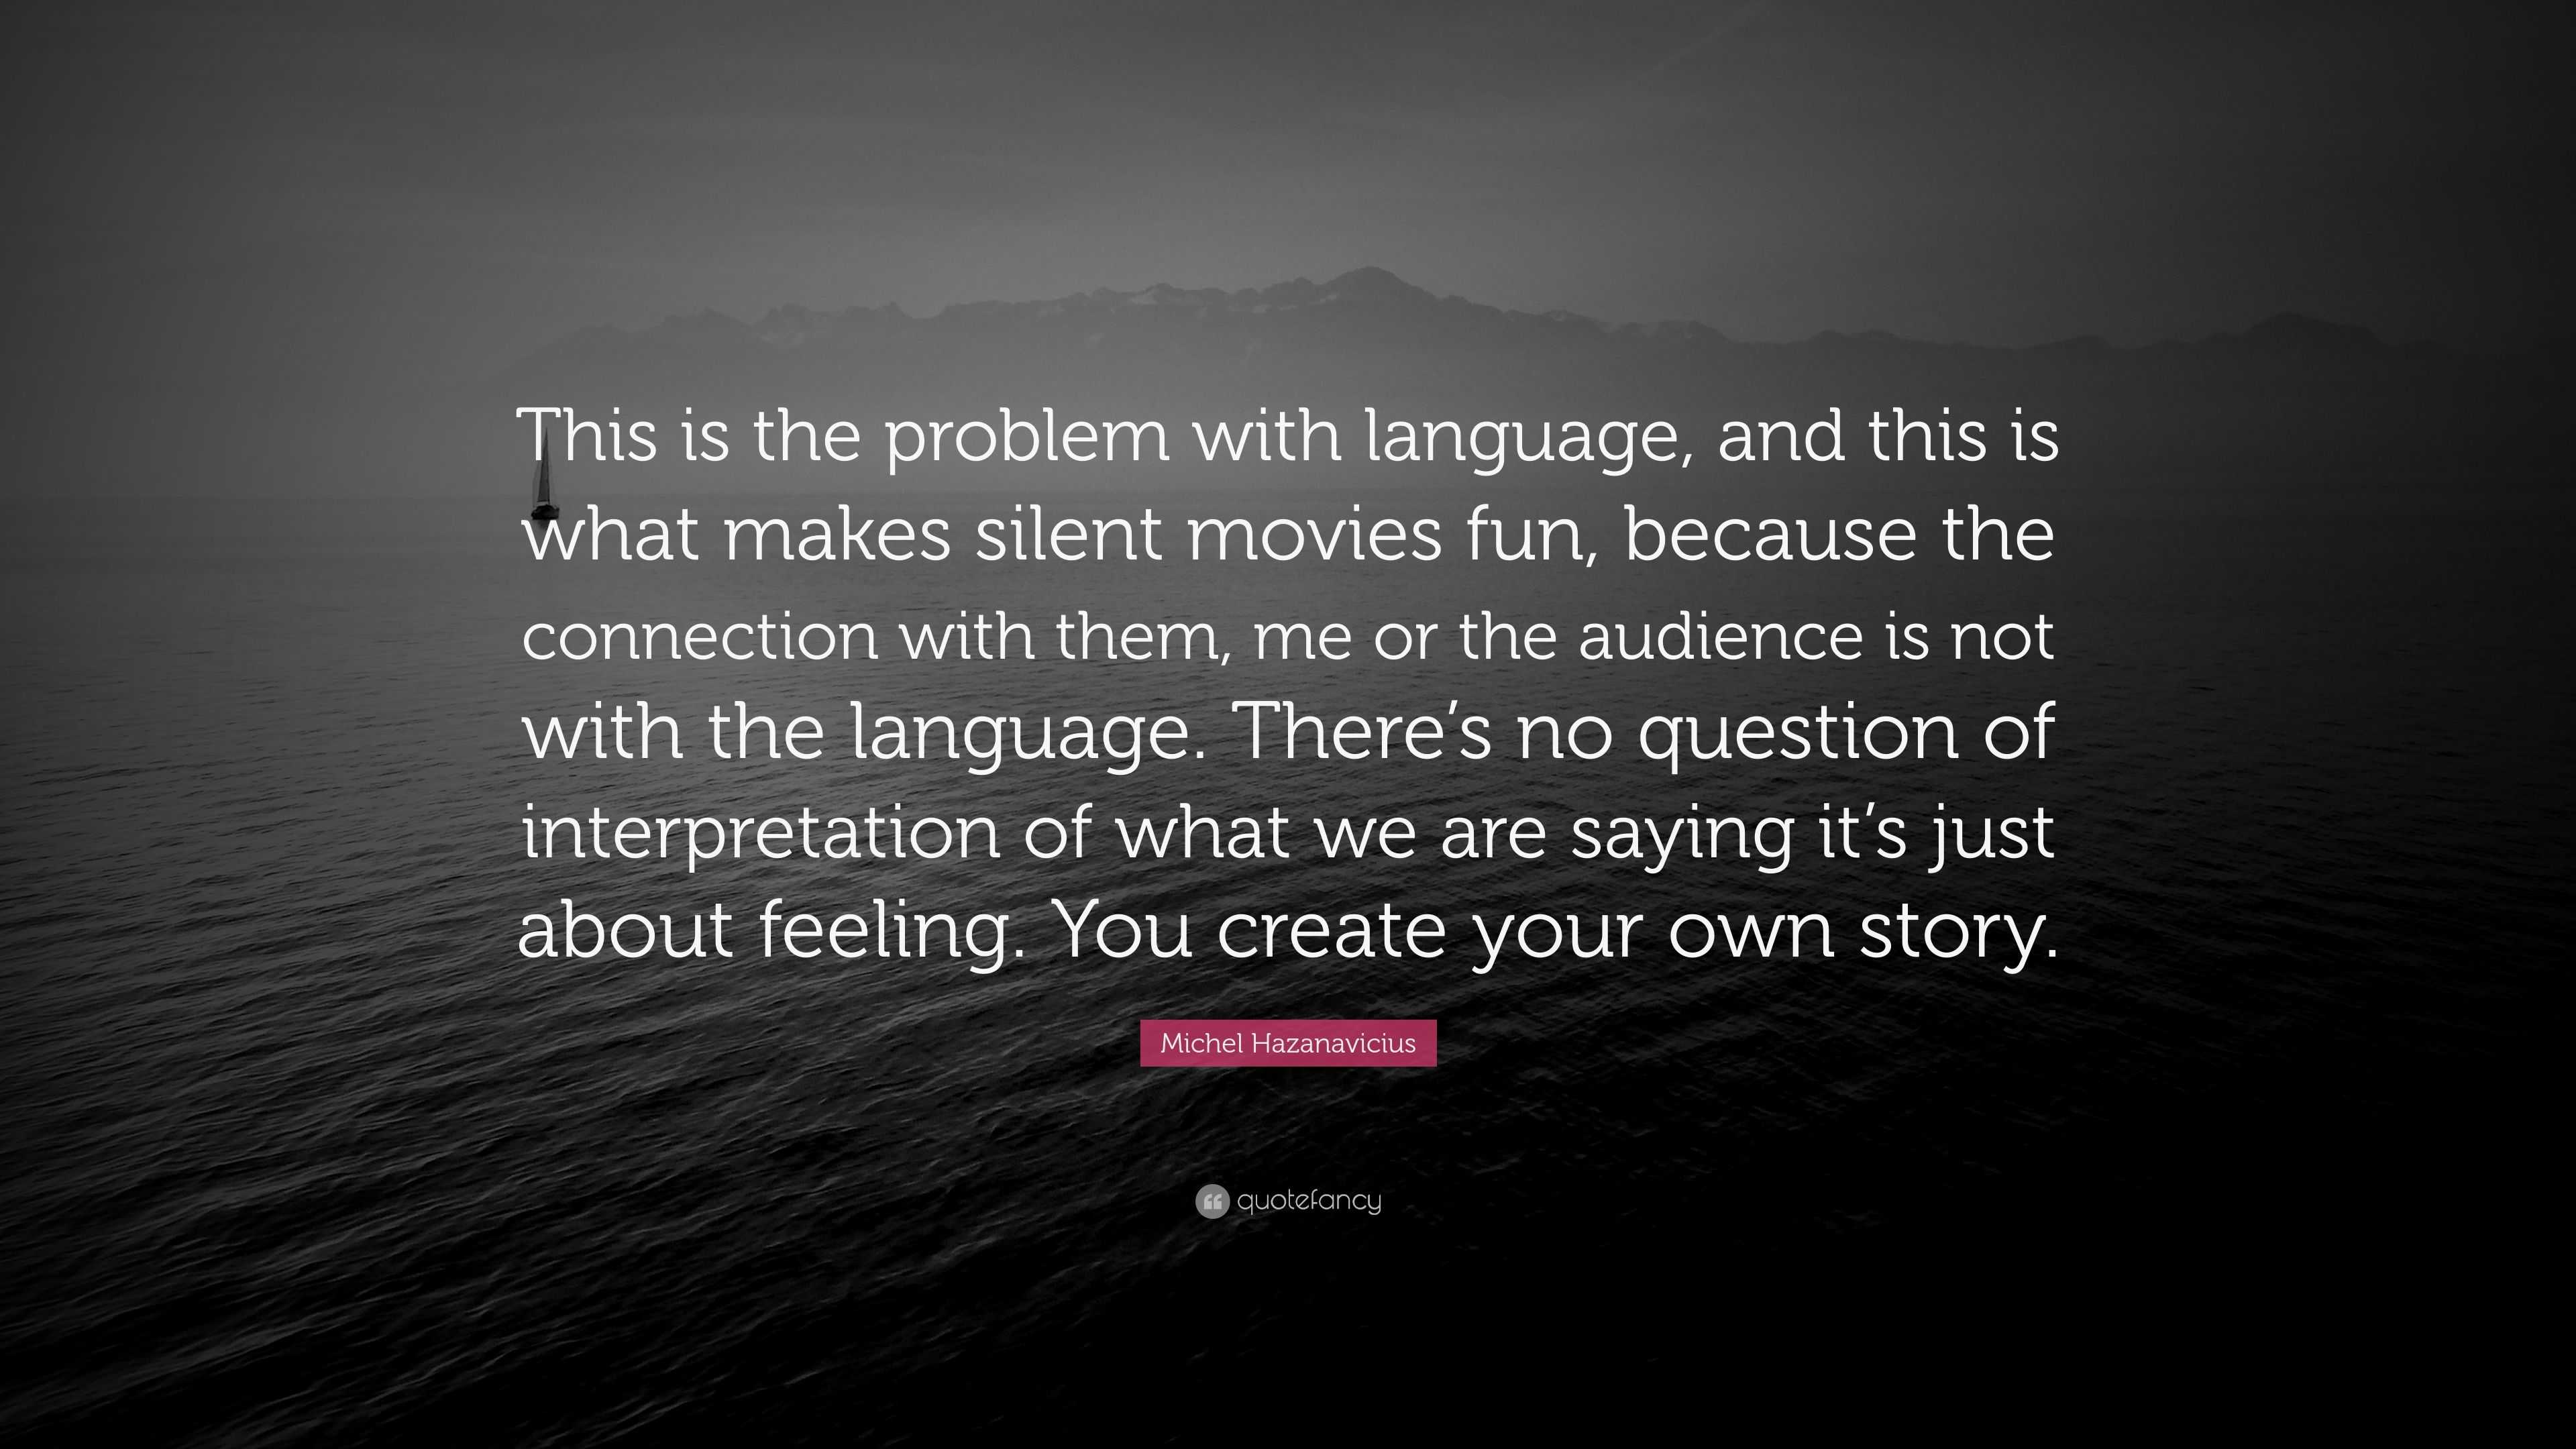 Michel Hazanavicius Quote: “This is the problem with language, and this is  what makes silent movies fun, because the connection with them, me or  the”